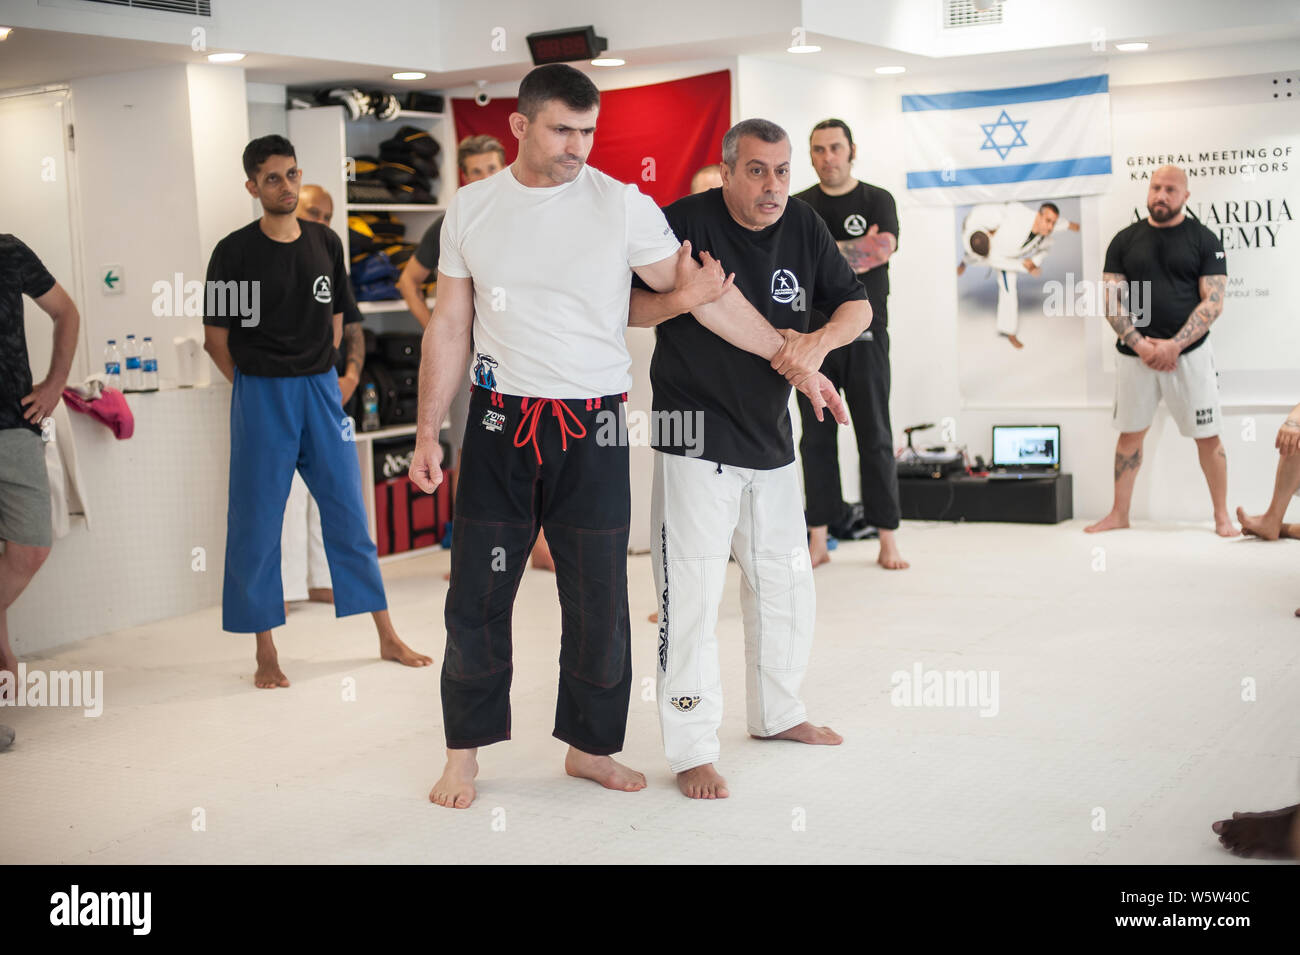 ISTANBUL, TURKEY - Maj 30 - Jun 02. 2019. Kapap instructor Avi Nardia demonstrate street fighting self defence technique with his students on GENERAL Stock Photo